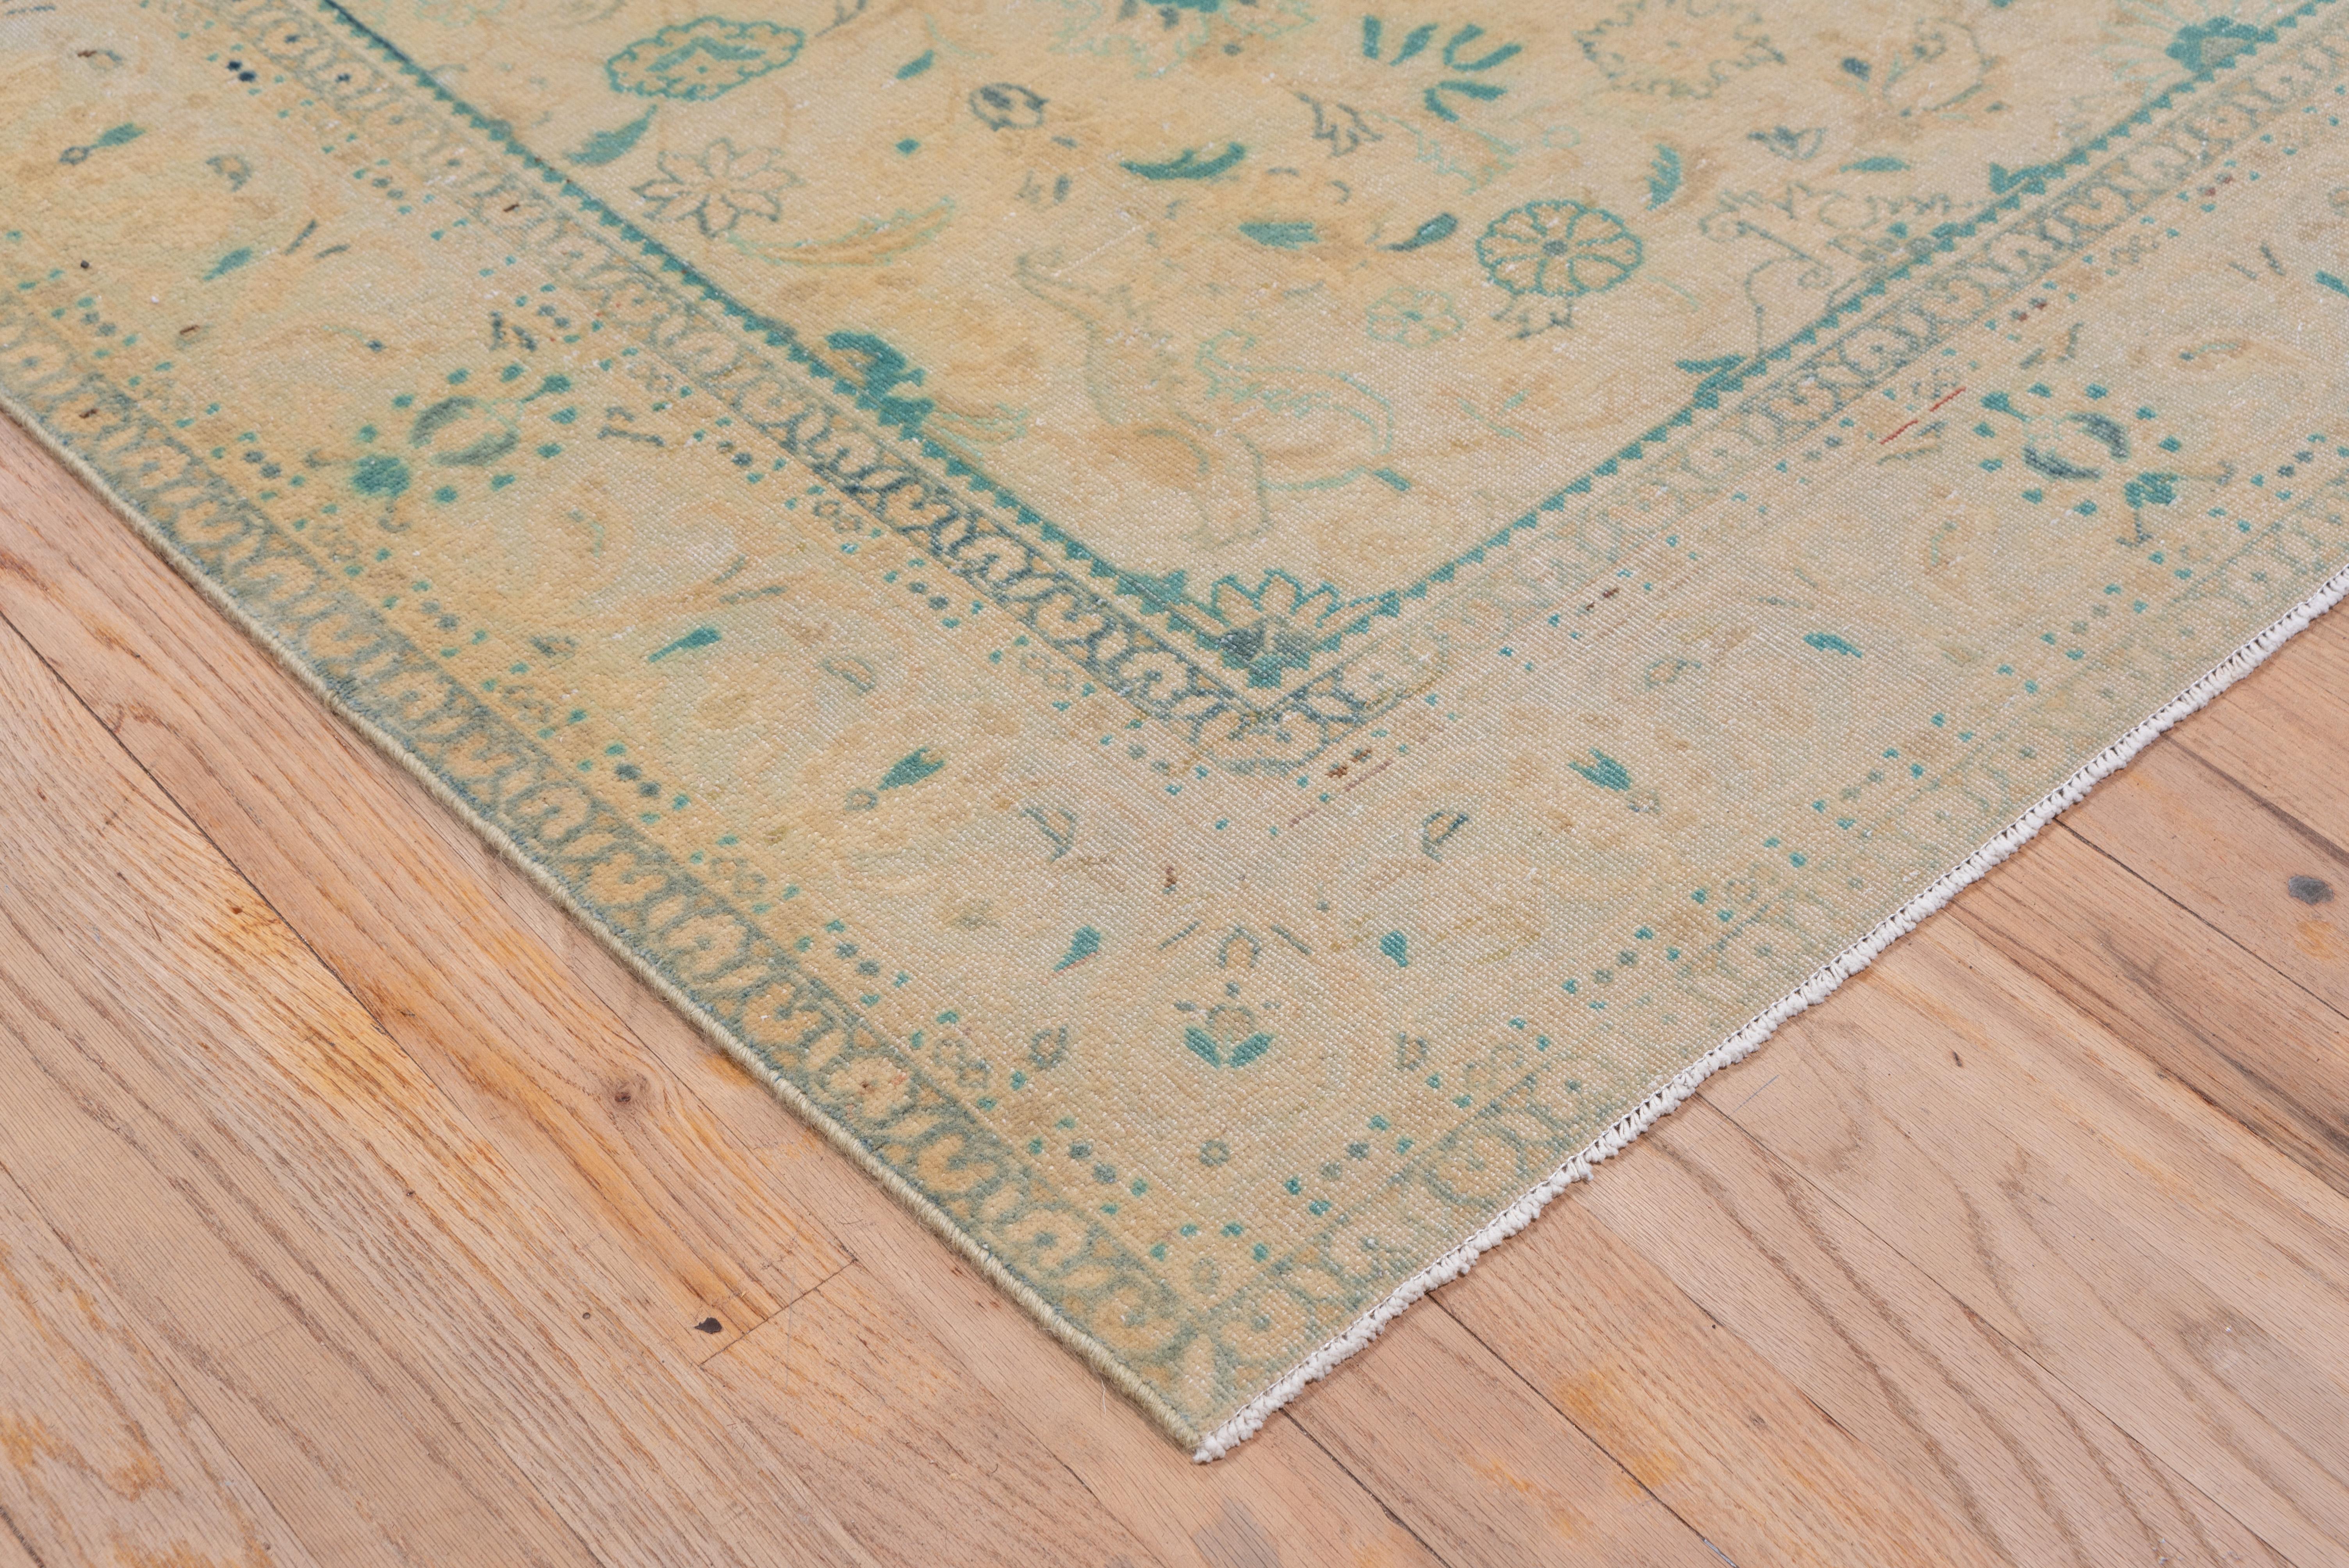 Tribal Antique Turkish Sivas Rug with Green Accents For Sale